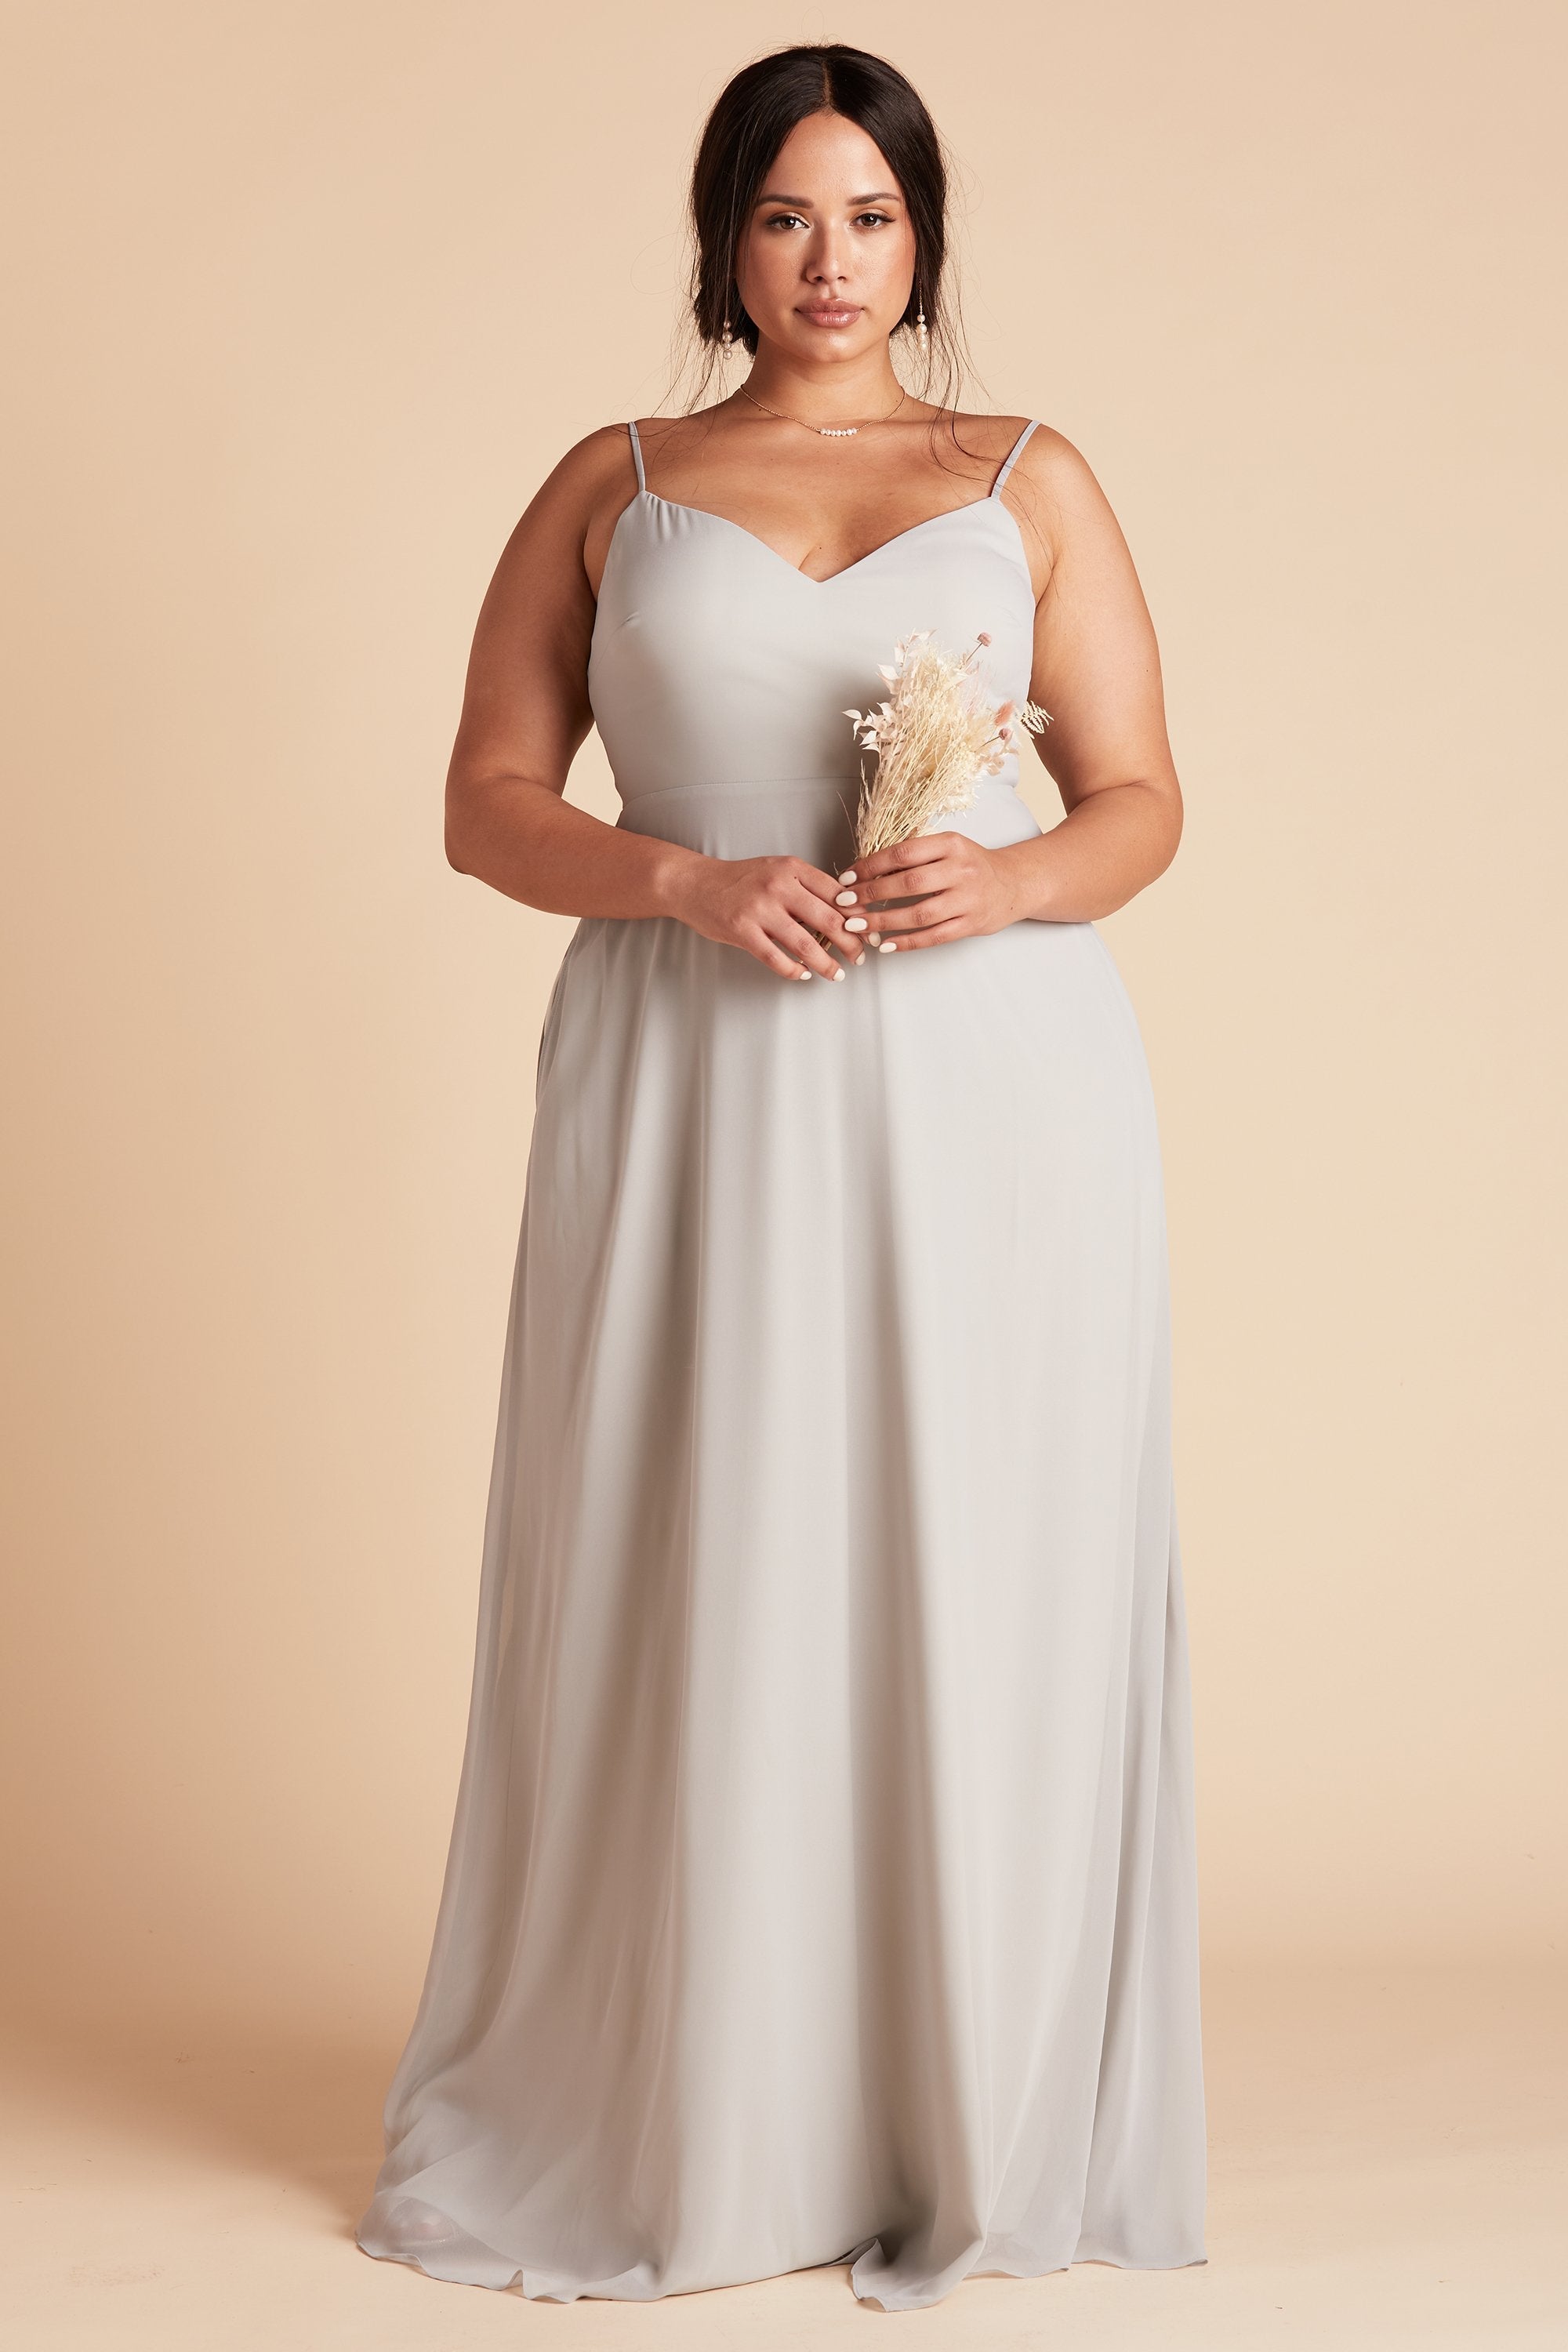 Devin convertible plus size bridesmaid dress in dove gray chiffon by Birdy Grey, front view